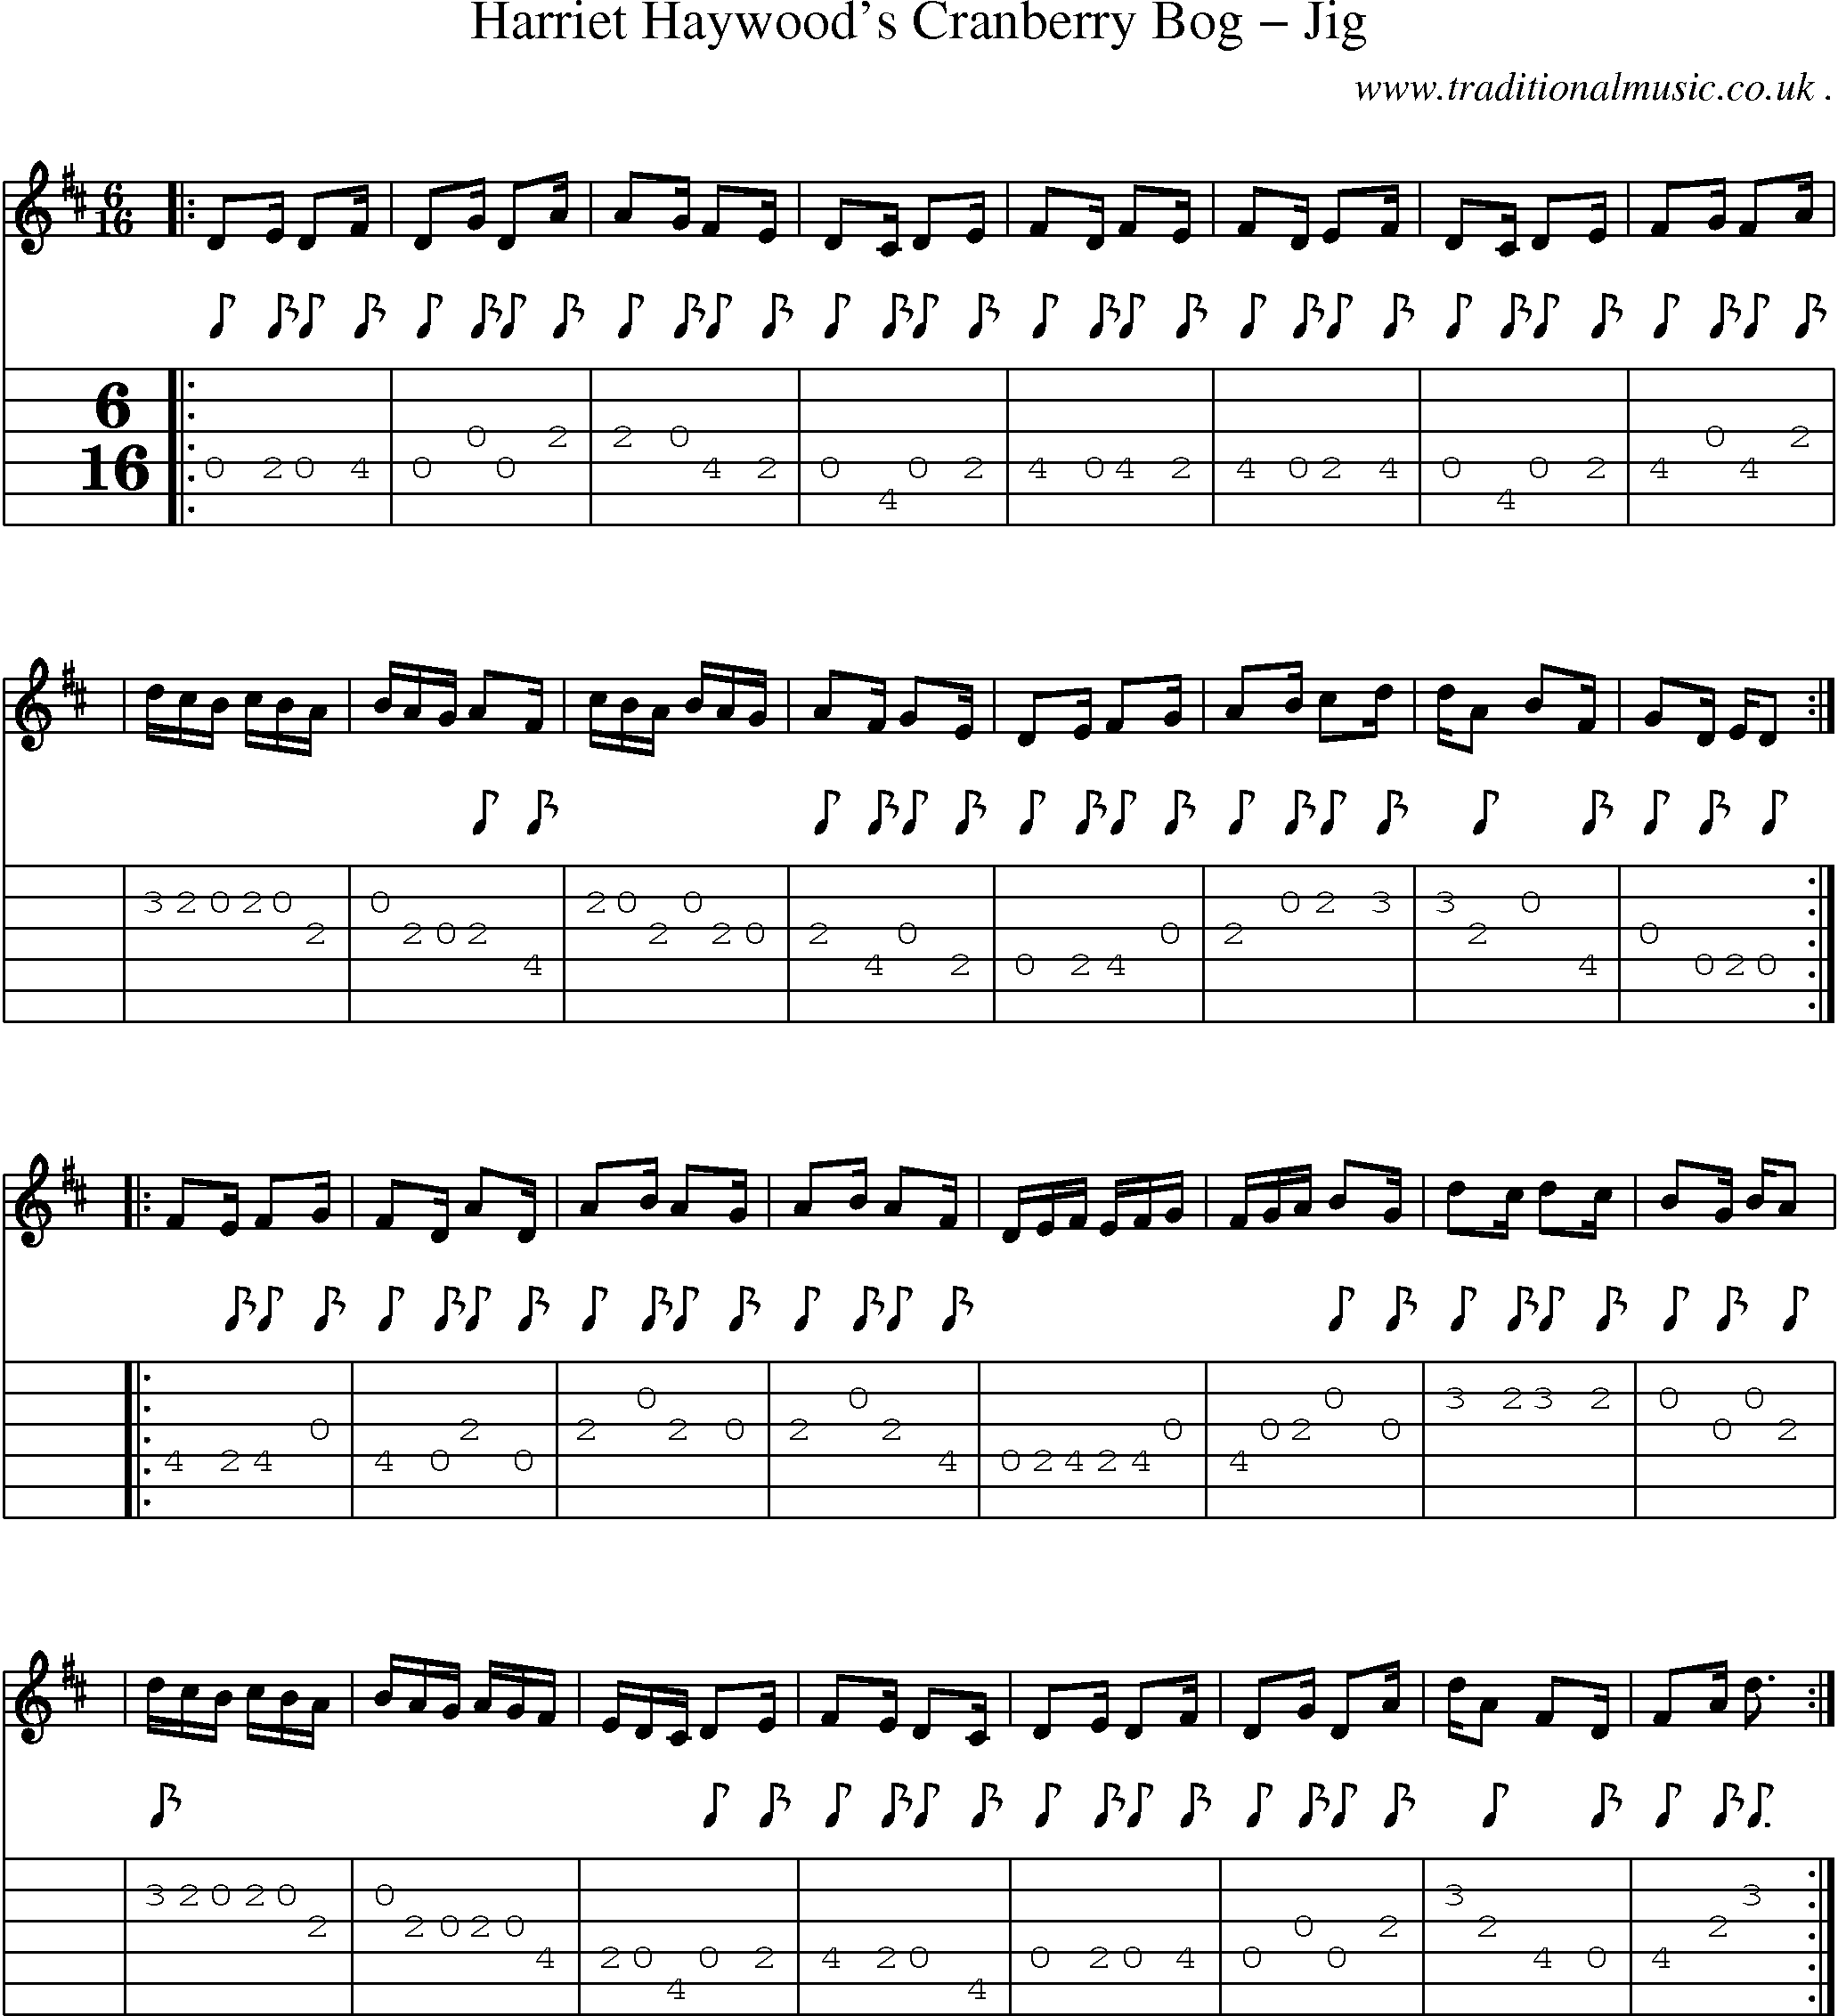 Sheet-music  score, Chords and Guitar Tabs for Harriet Haywoods Cranberry Bog Jig